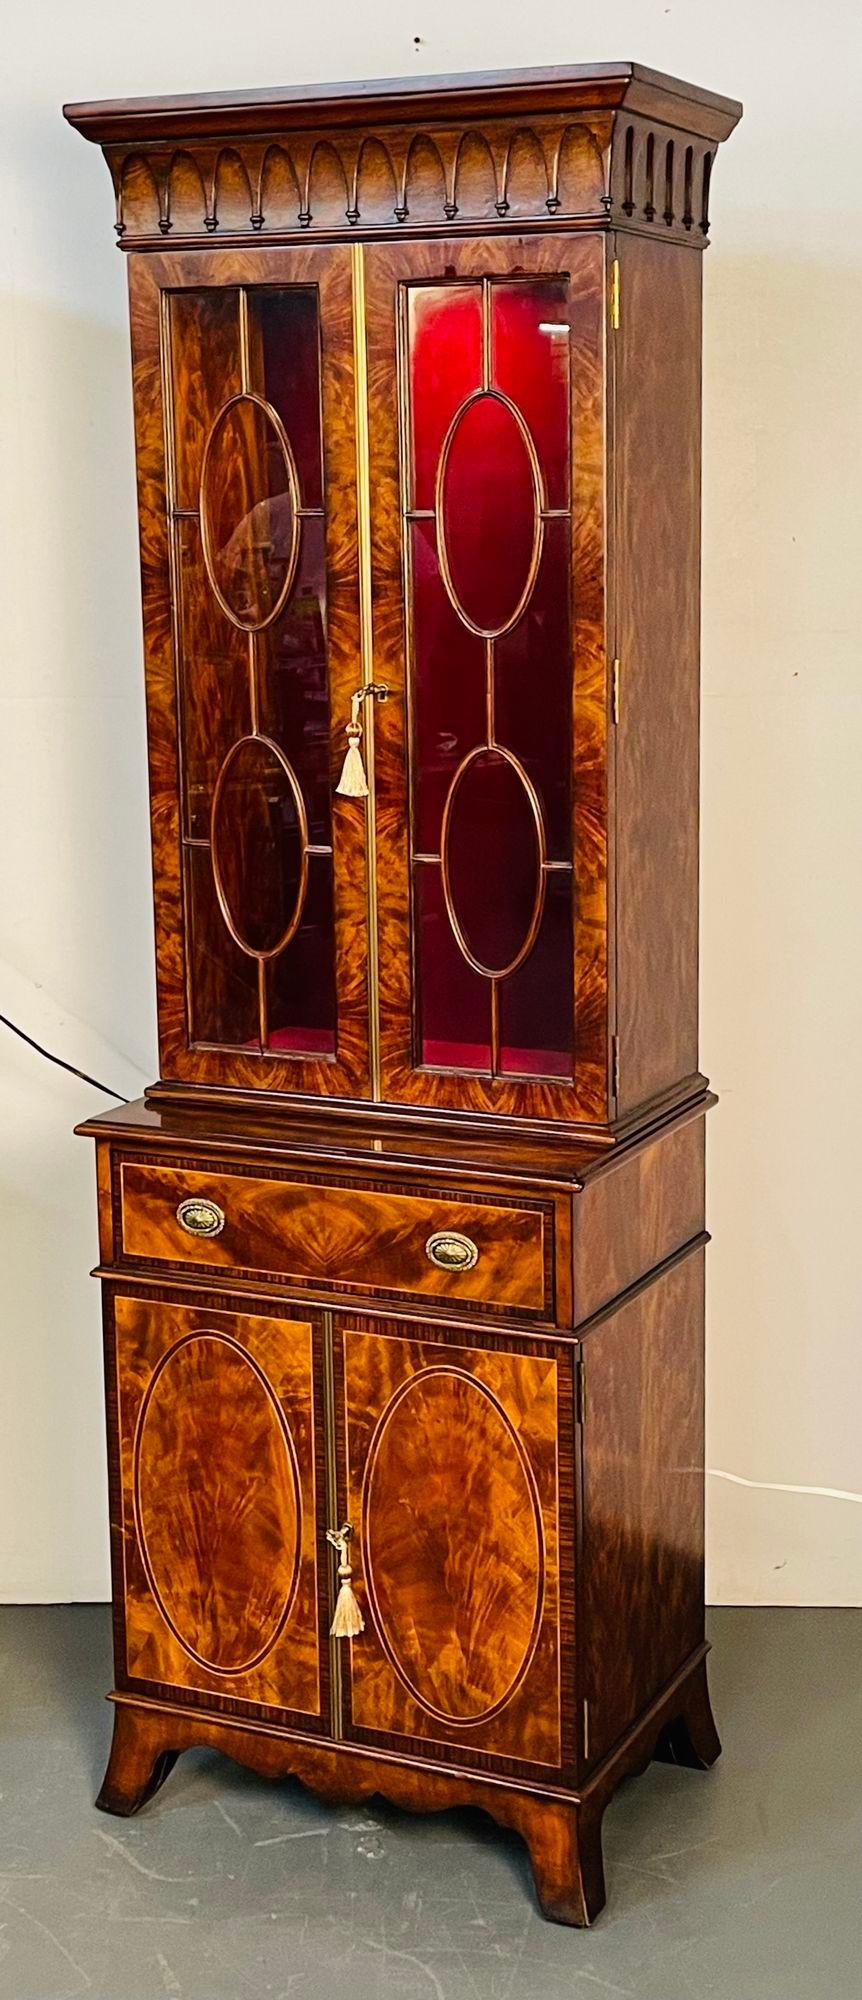 Theodore Alexander, Sheraton Style, Bookcases, Flame Mahogany, Glass, 1970s For Sale 7